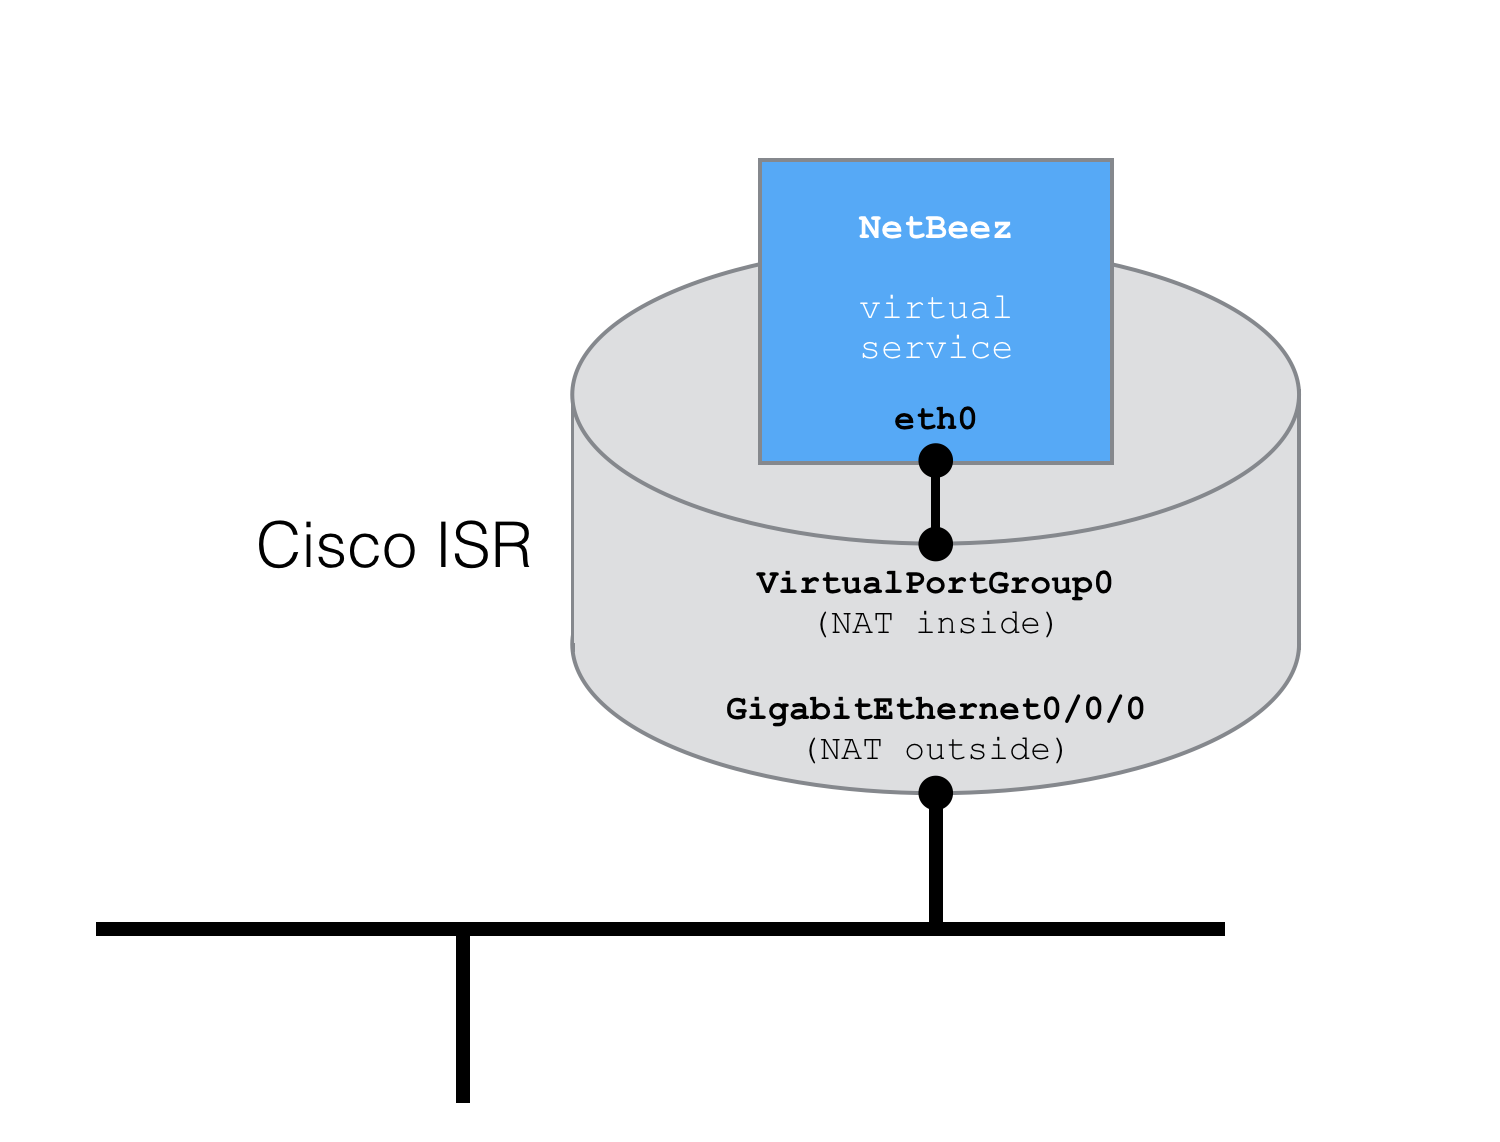 Configuration of the Cisco ISR to host the NetBeez virtual service.